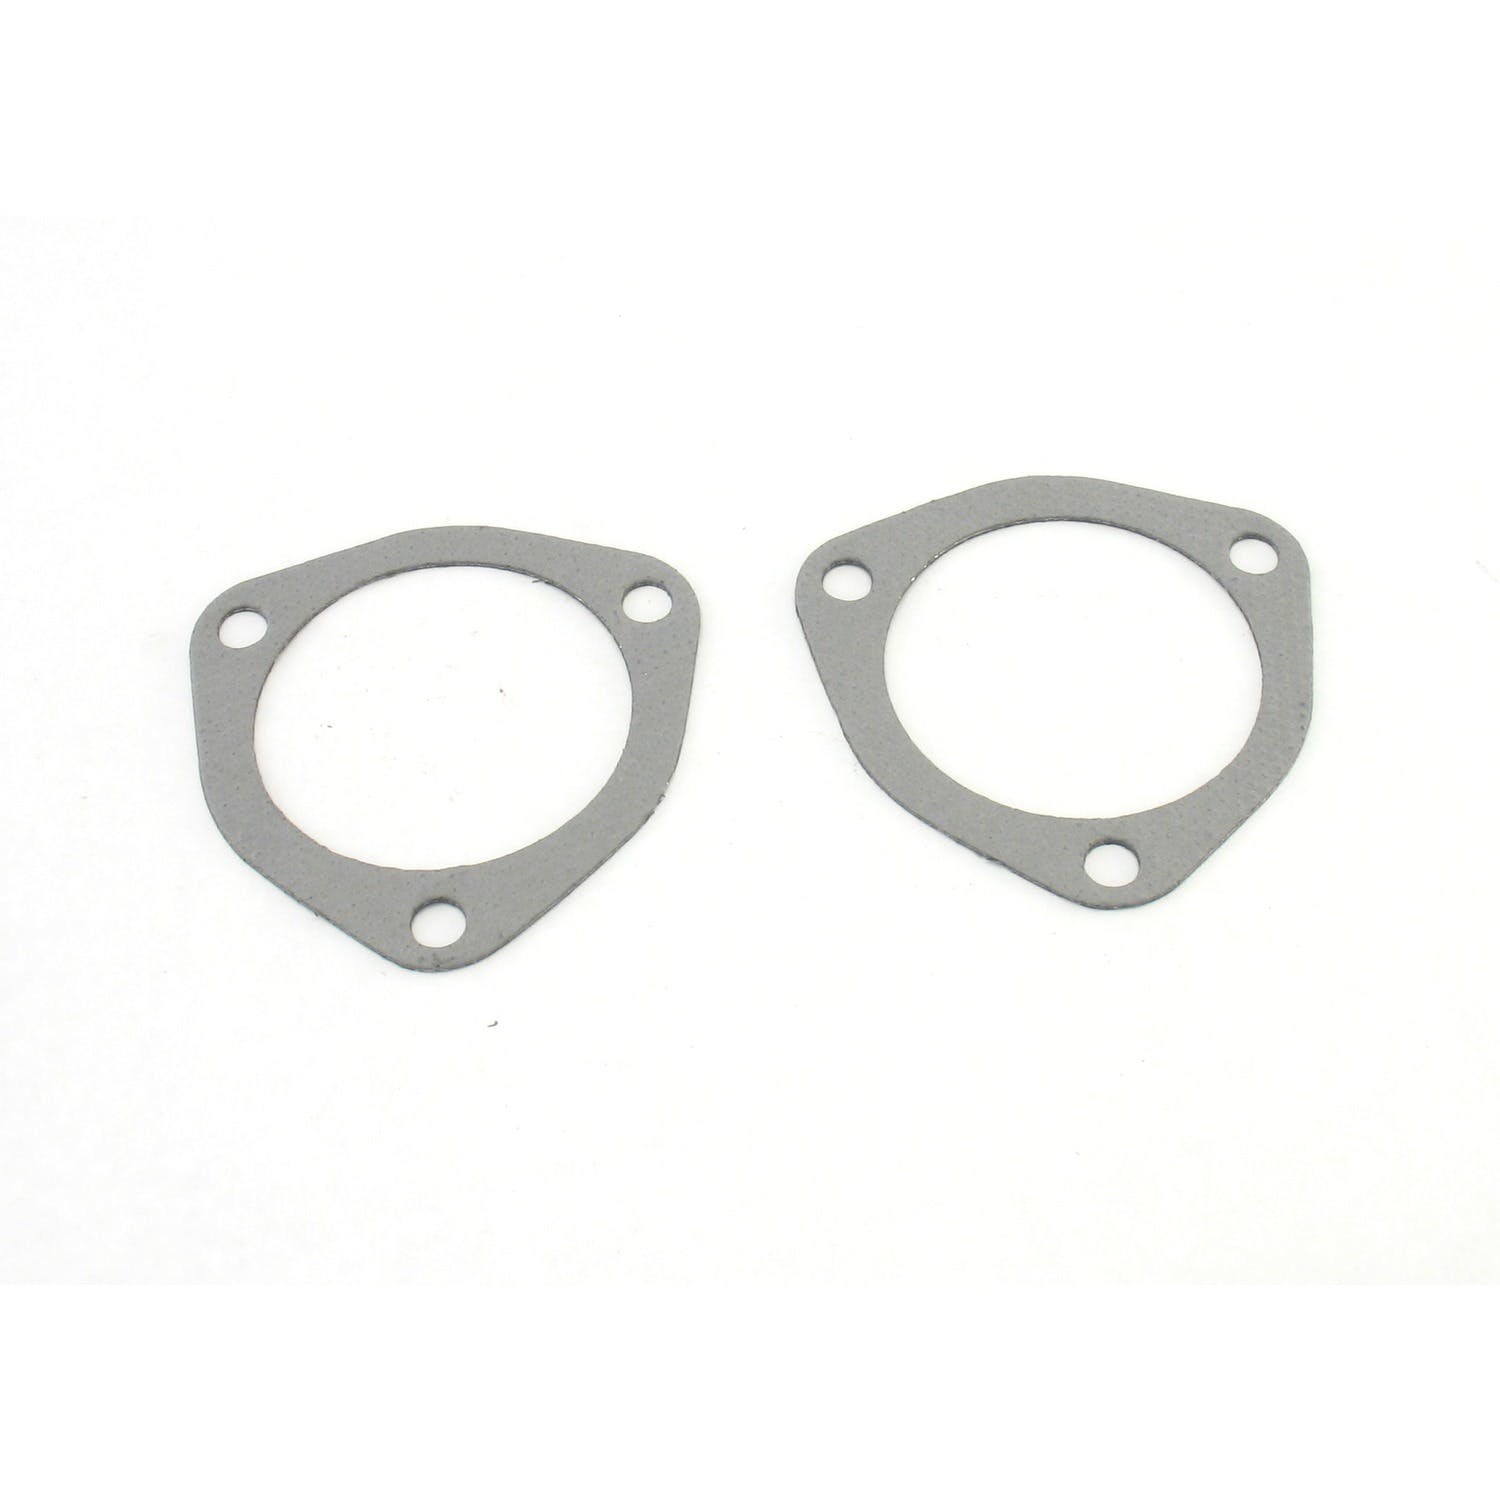 Patriot Exhaust H7947 3 inch Collector Gasket Universal Pair